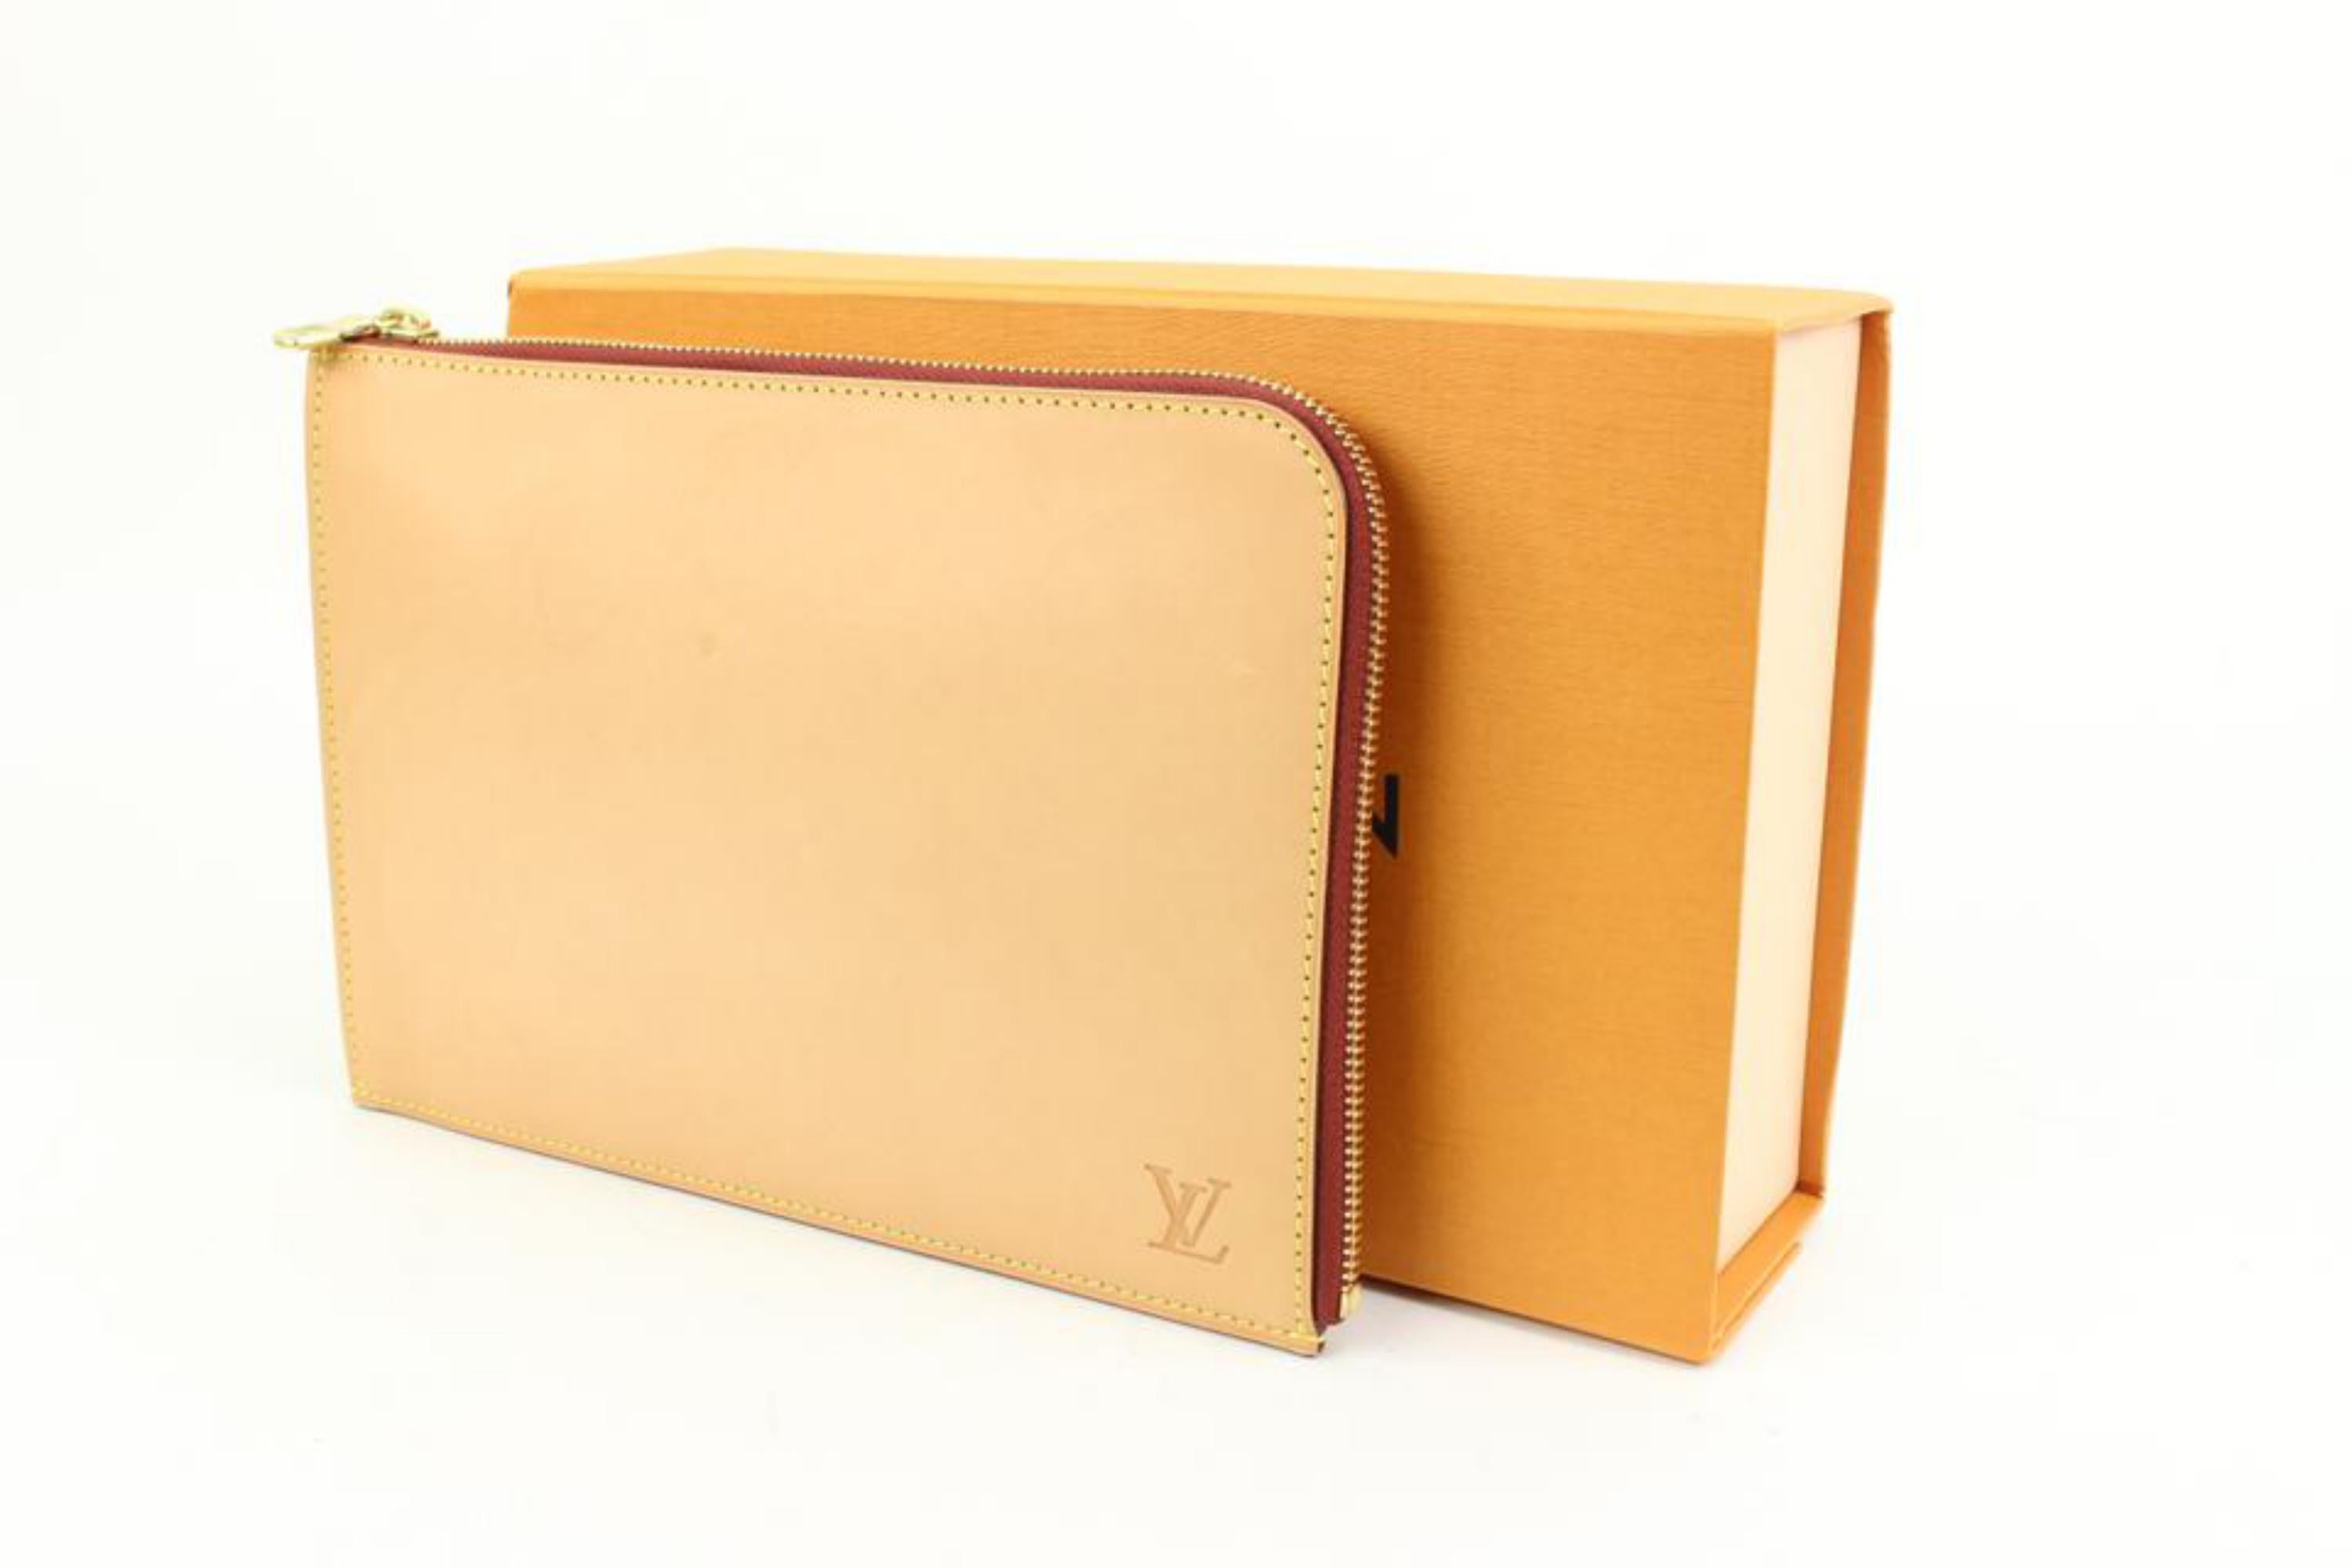 Louis Vuitton Natural Vachetta Leather Pochette Jules Zip Clutch 76lk317s
Made In: Italy
Measurements: Length:  9.2